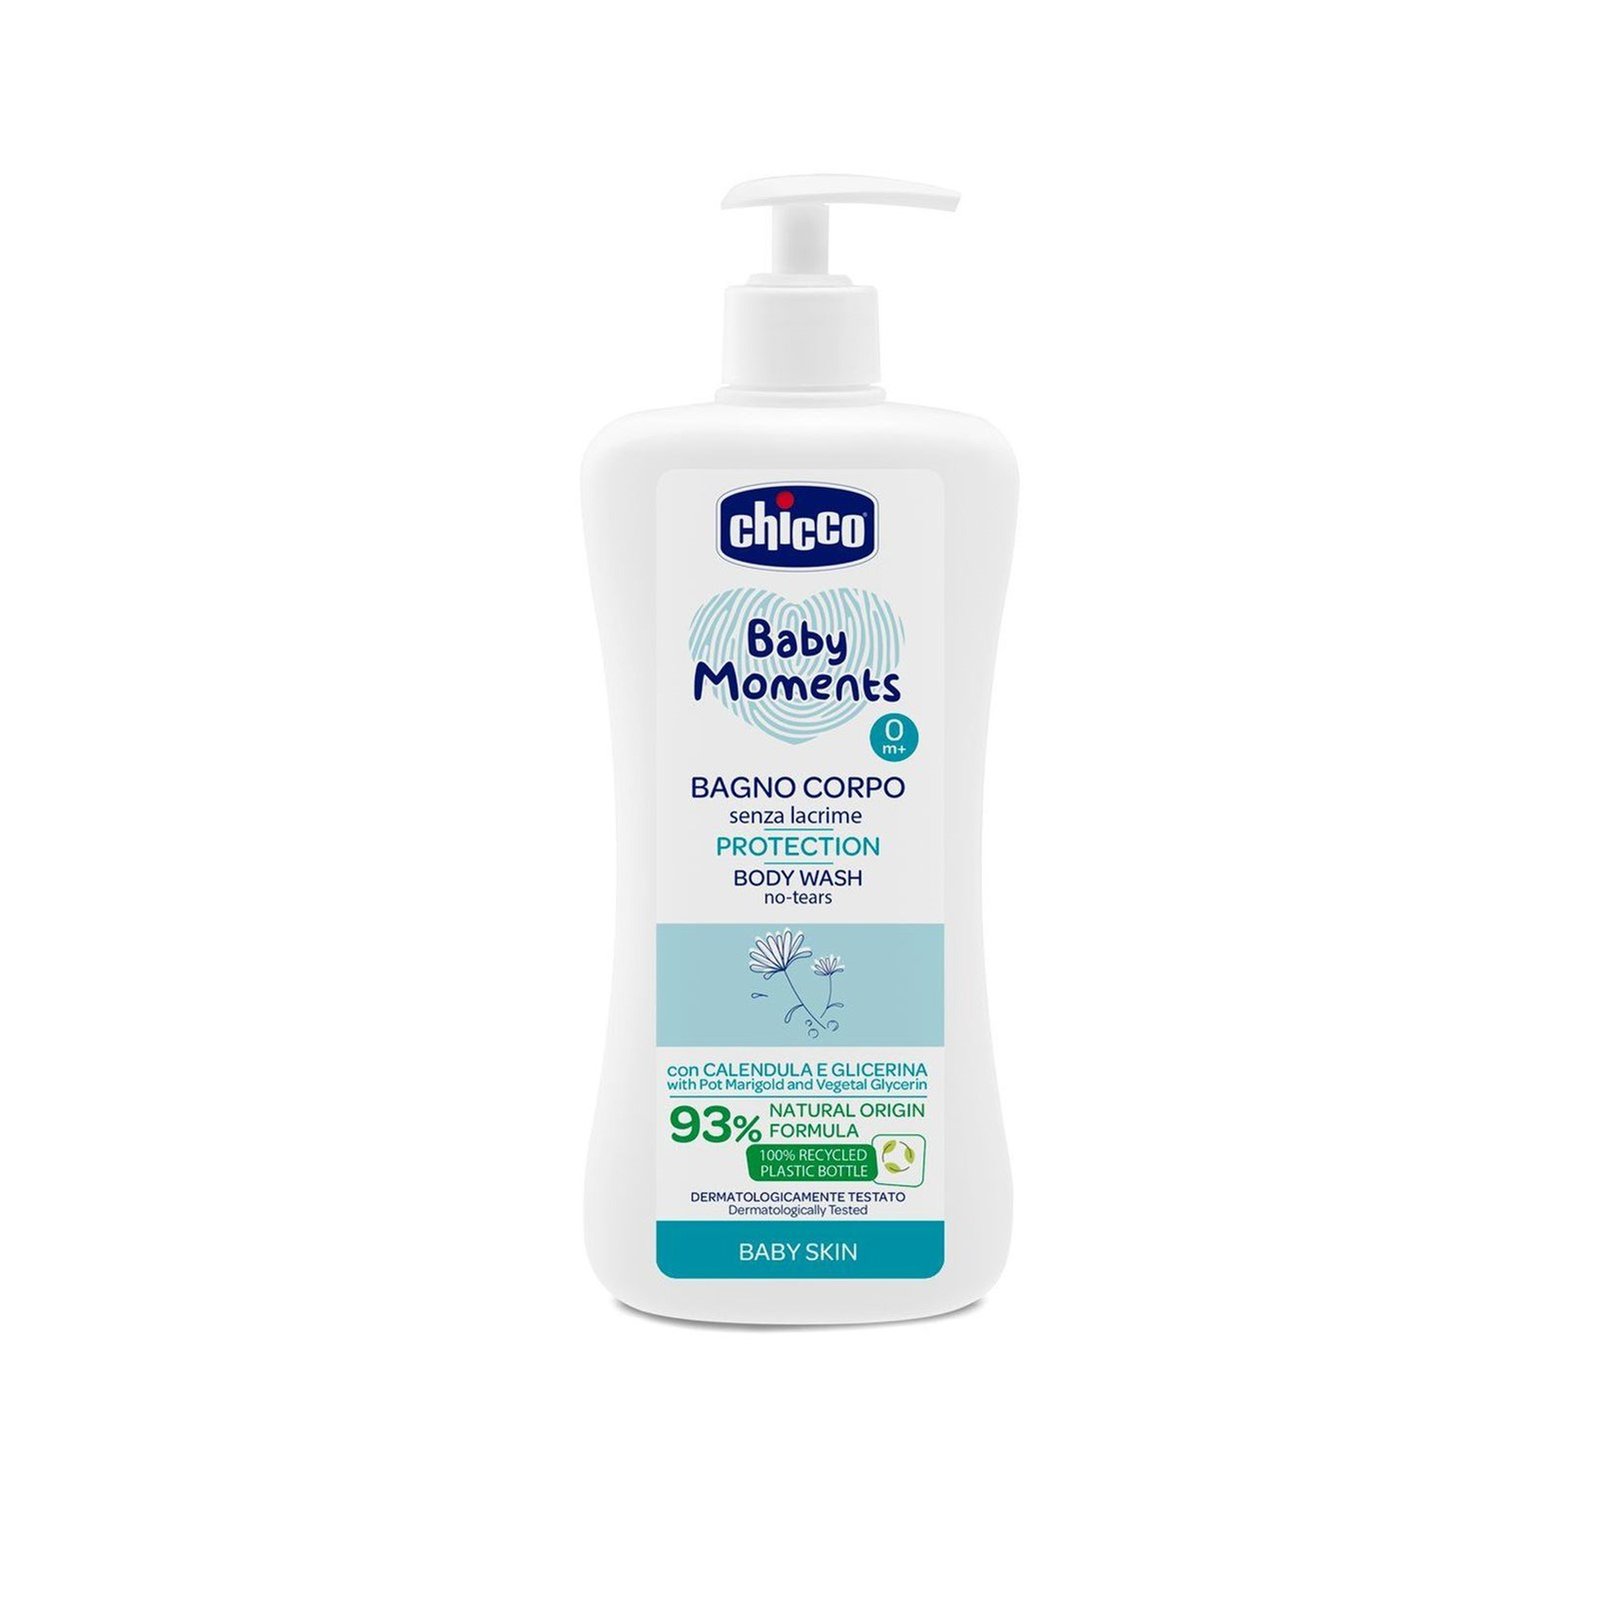 Chicco Baby Moments Protection No-Tears Body Wash 0m+ 500ml